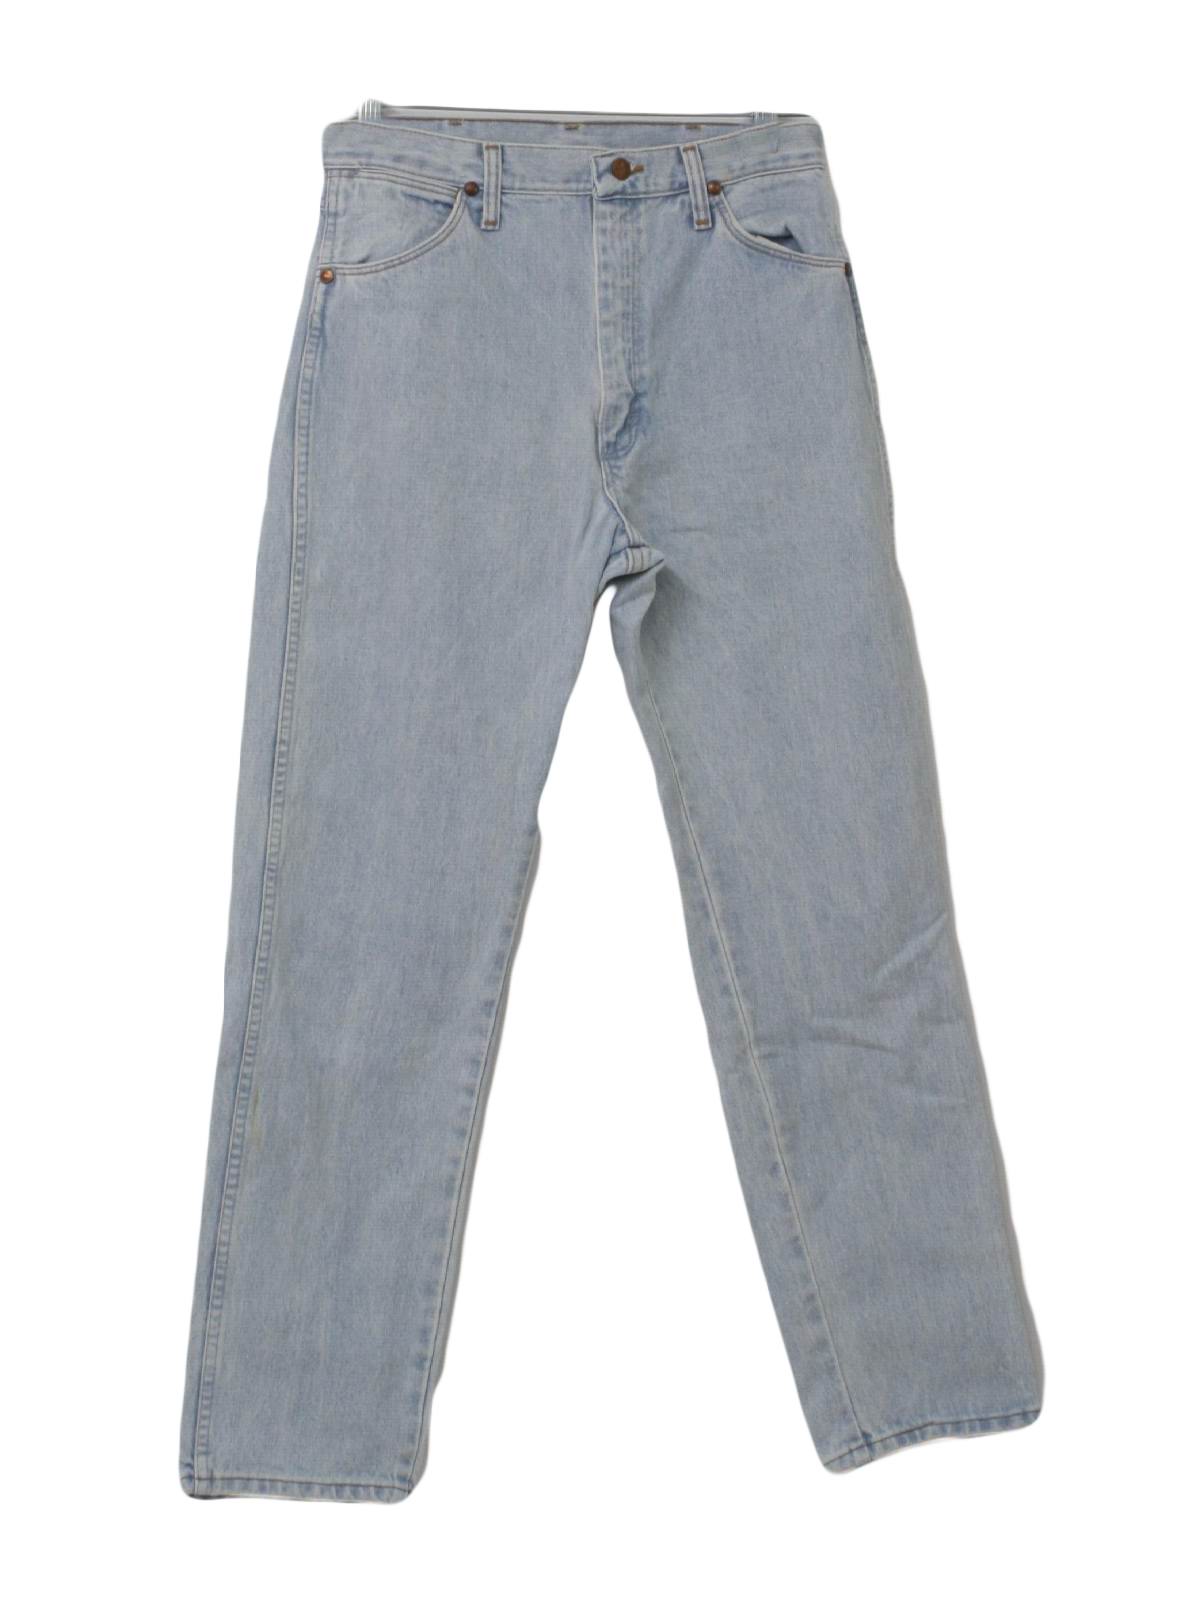 Eighties Vintage Pants: 80s -Wrangler- Mens light blue stone washed ...